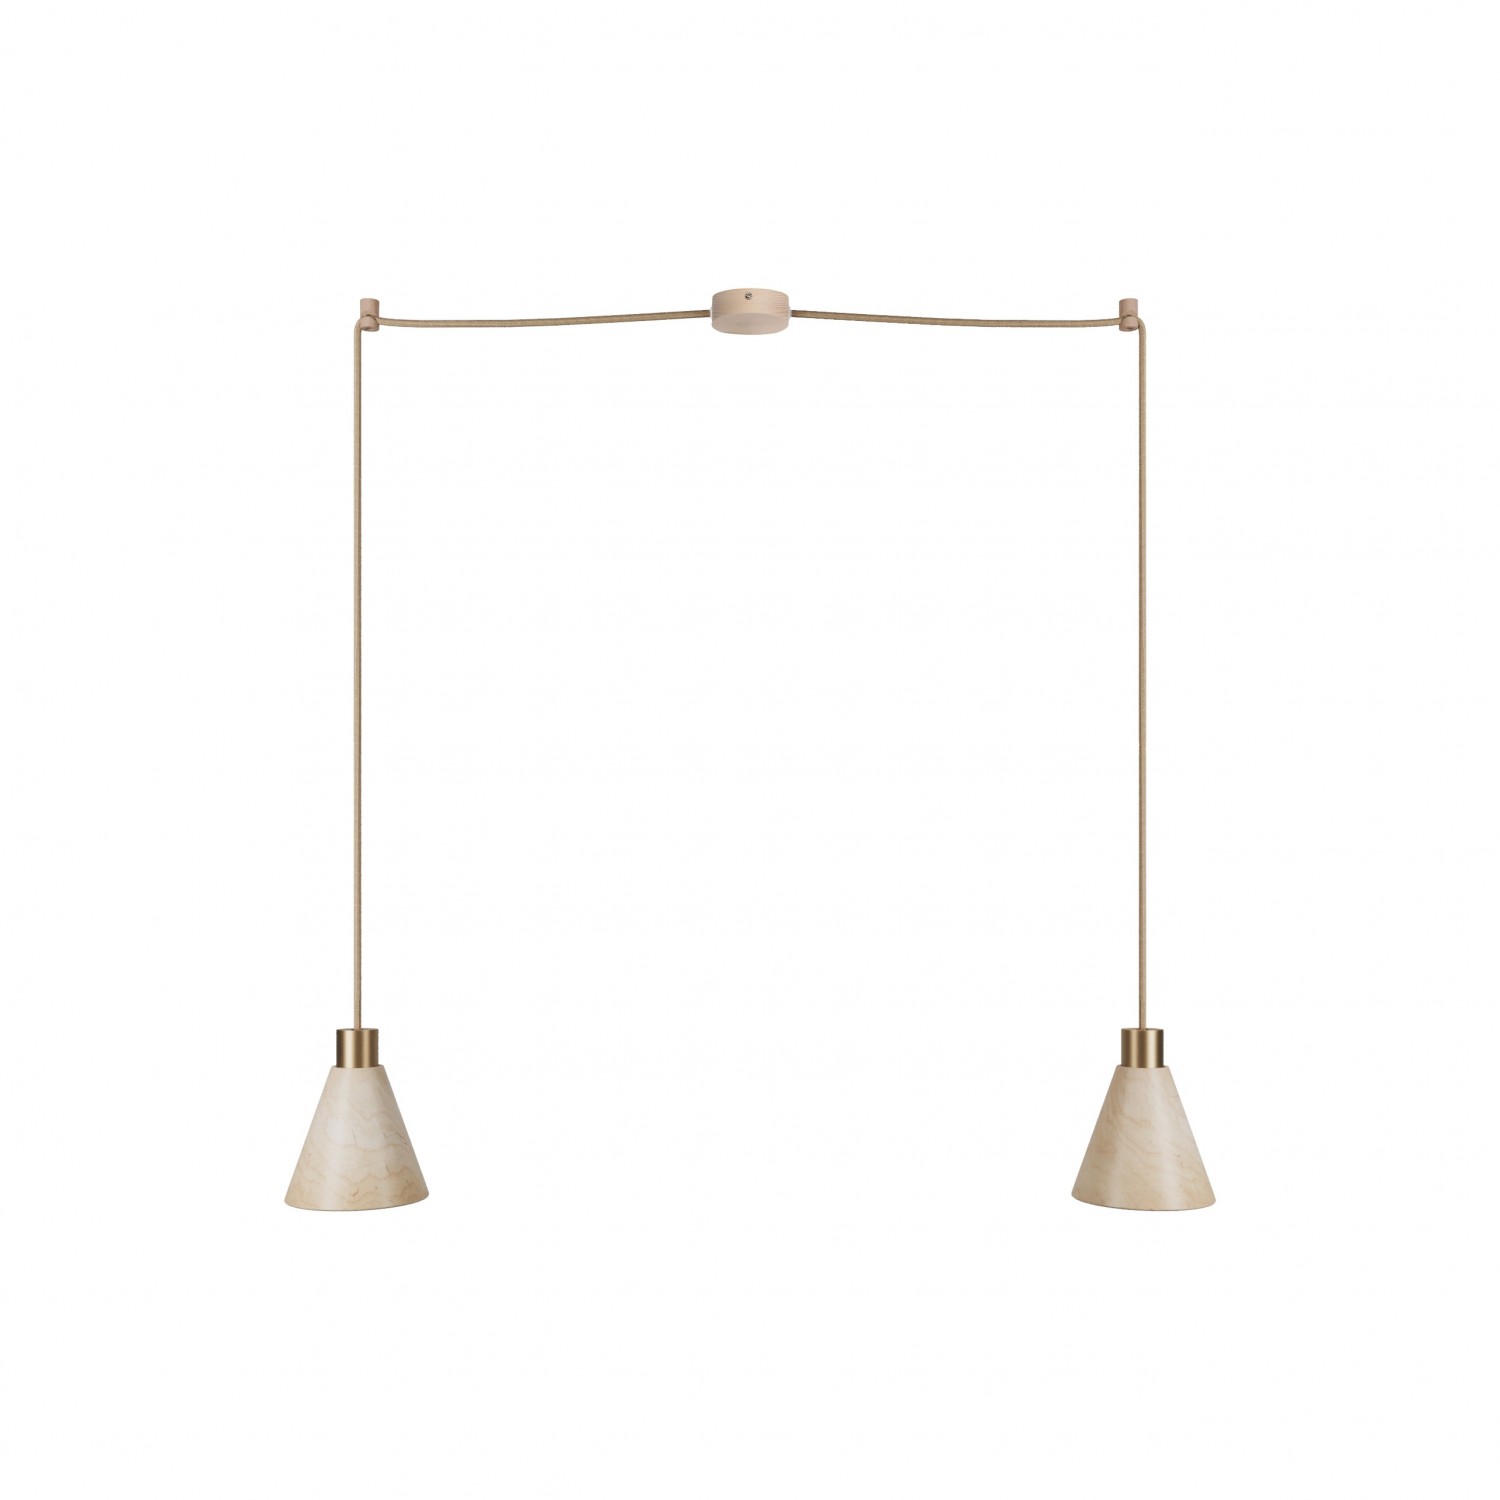 2-drop pendant lamp with wooden conical lampshades